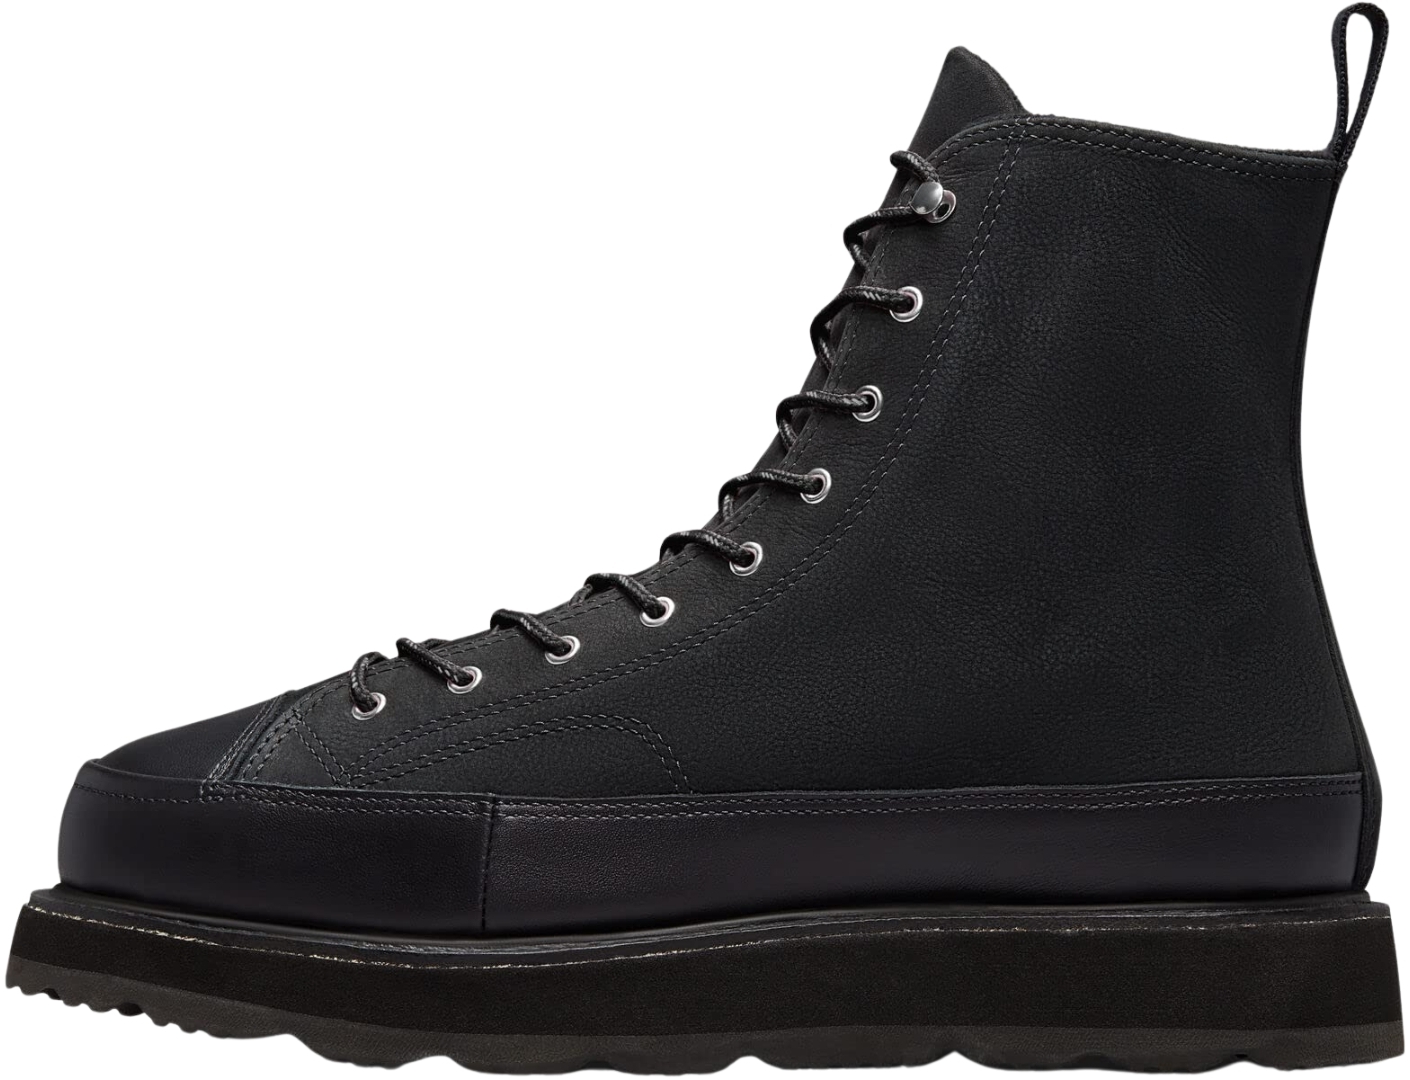 MytennisprofileShops | brand new with original box Converse x Josh Vides  Chuck 70 A00711C | Converse Crafted Boot Chuck Taylor sneakers in 3 colors  (only $85)